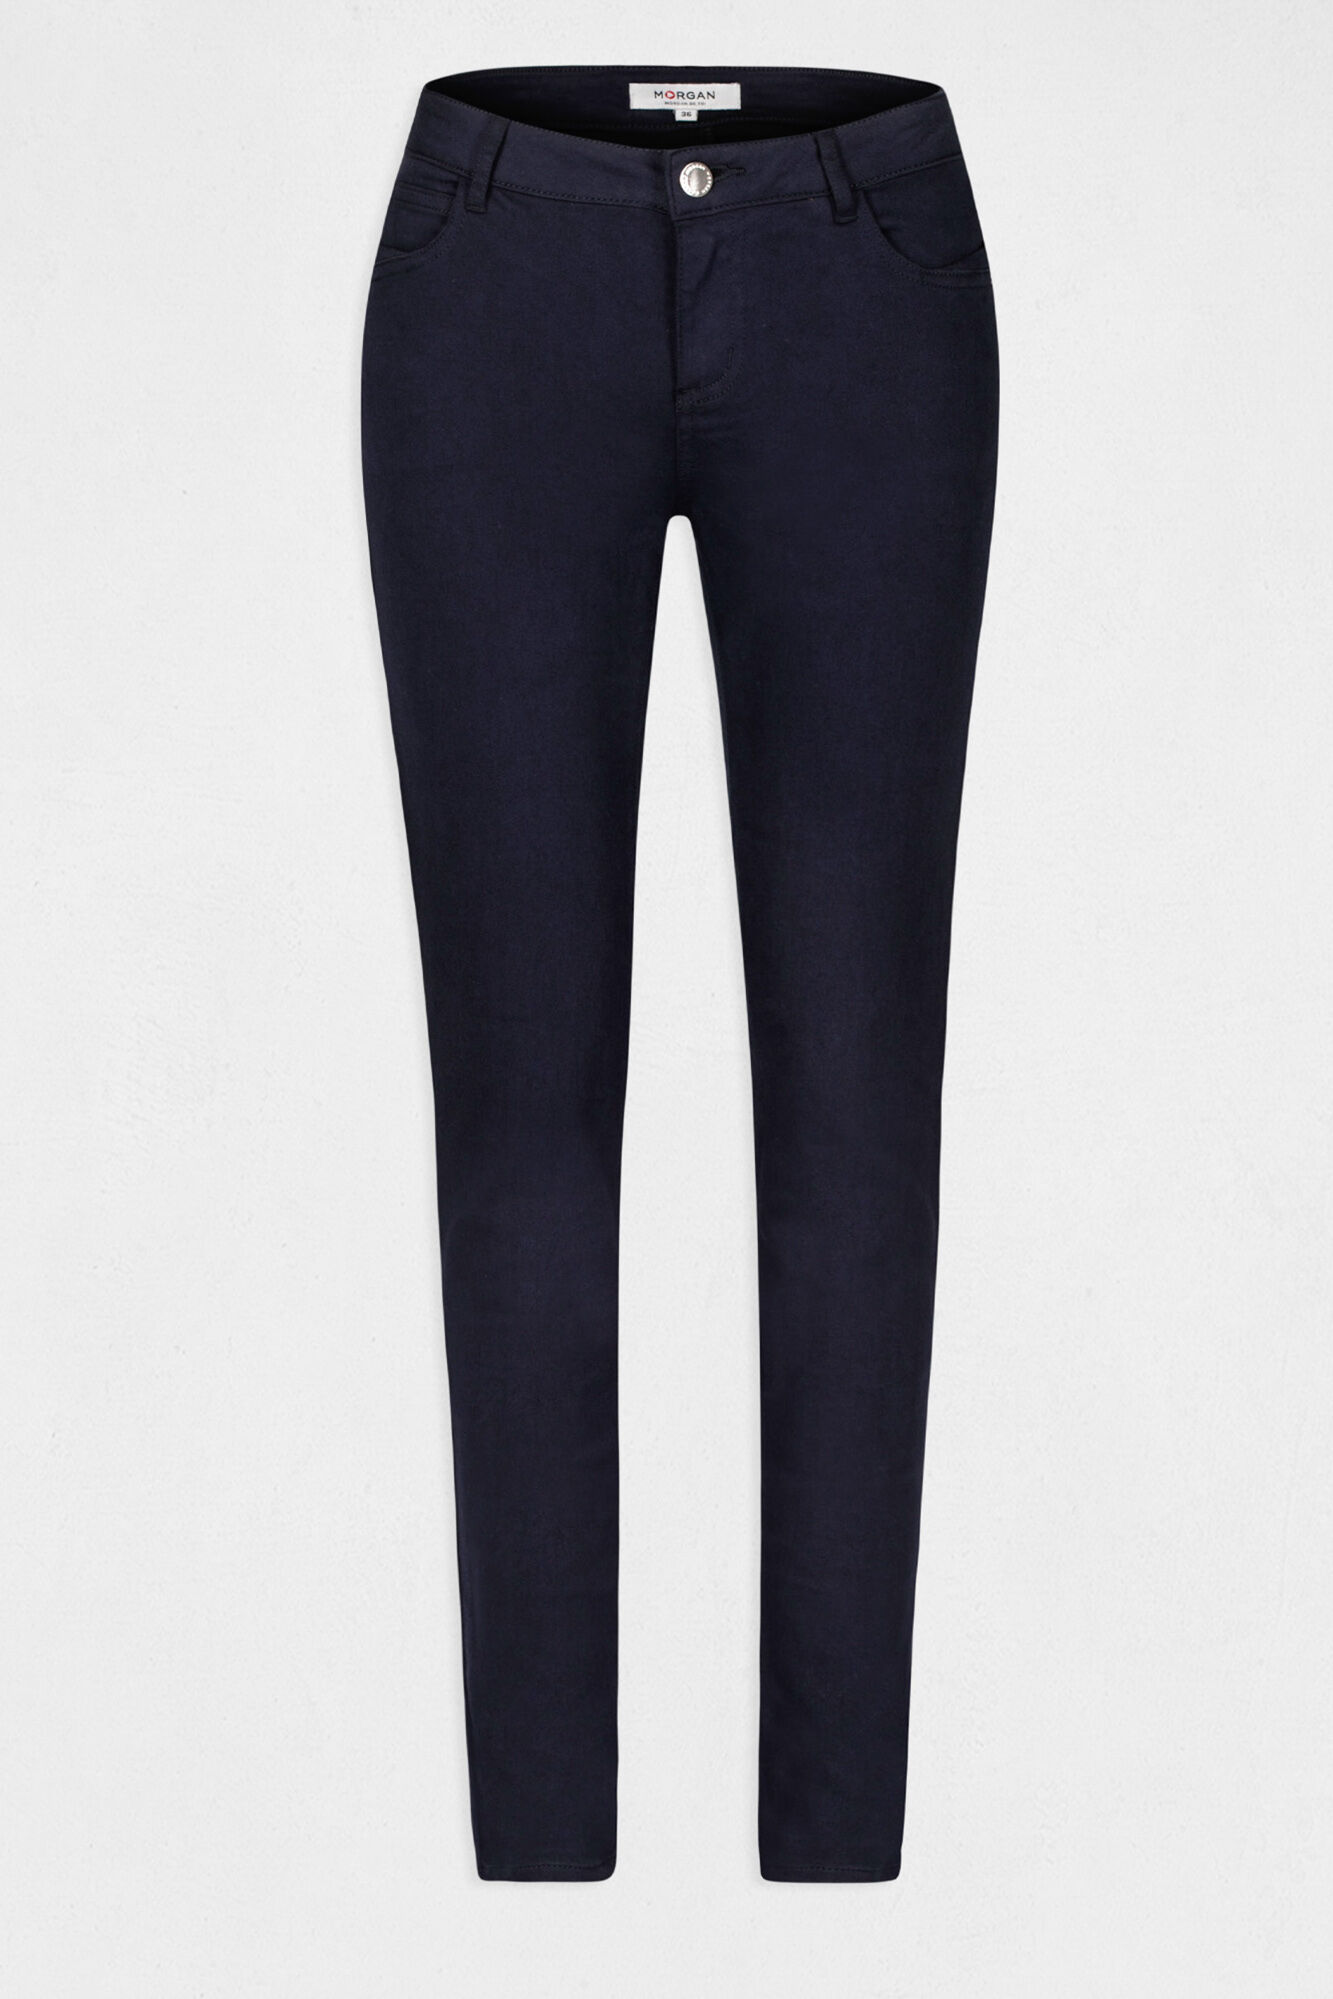 Jeans & Trousers | Navy Blue Skinny Trouser | Freeup